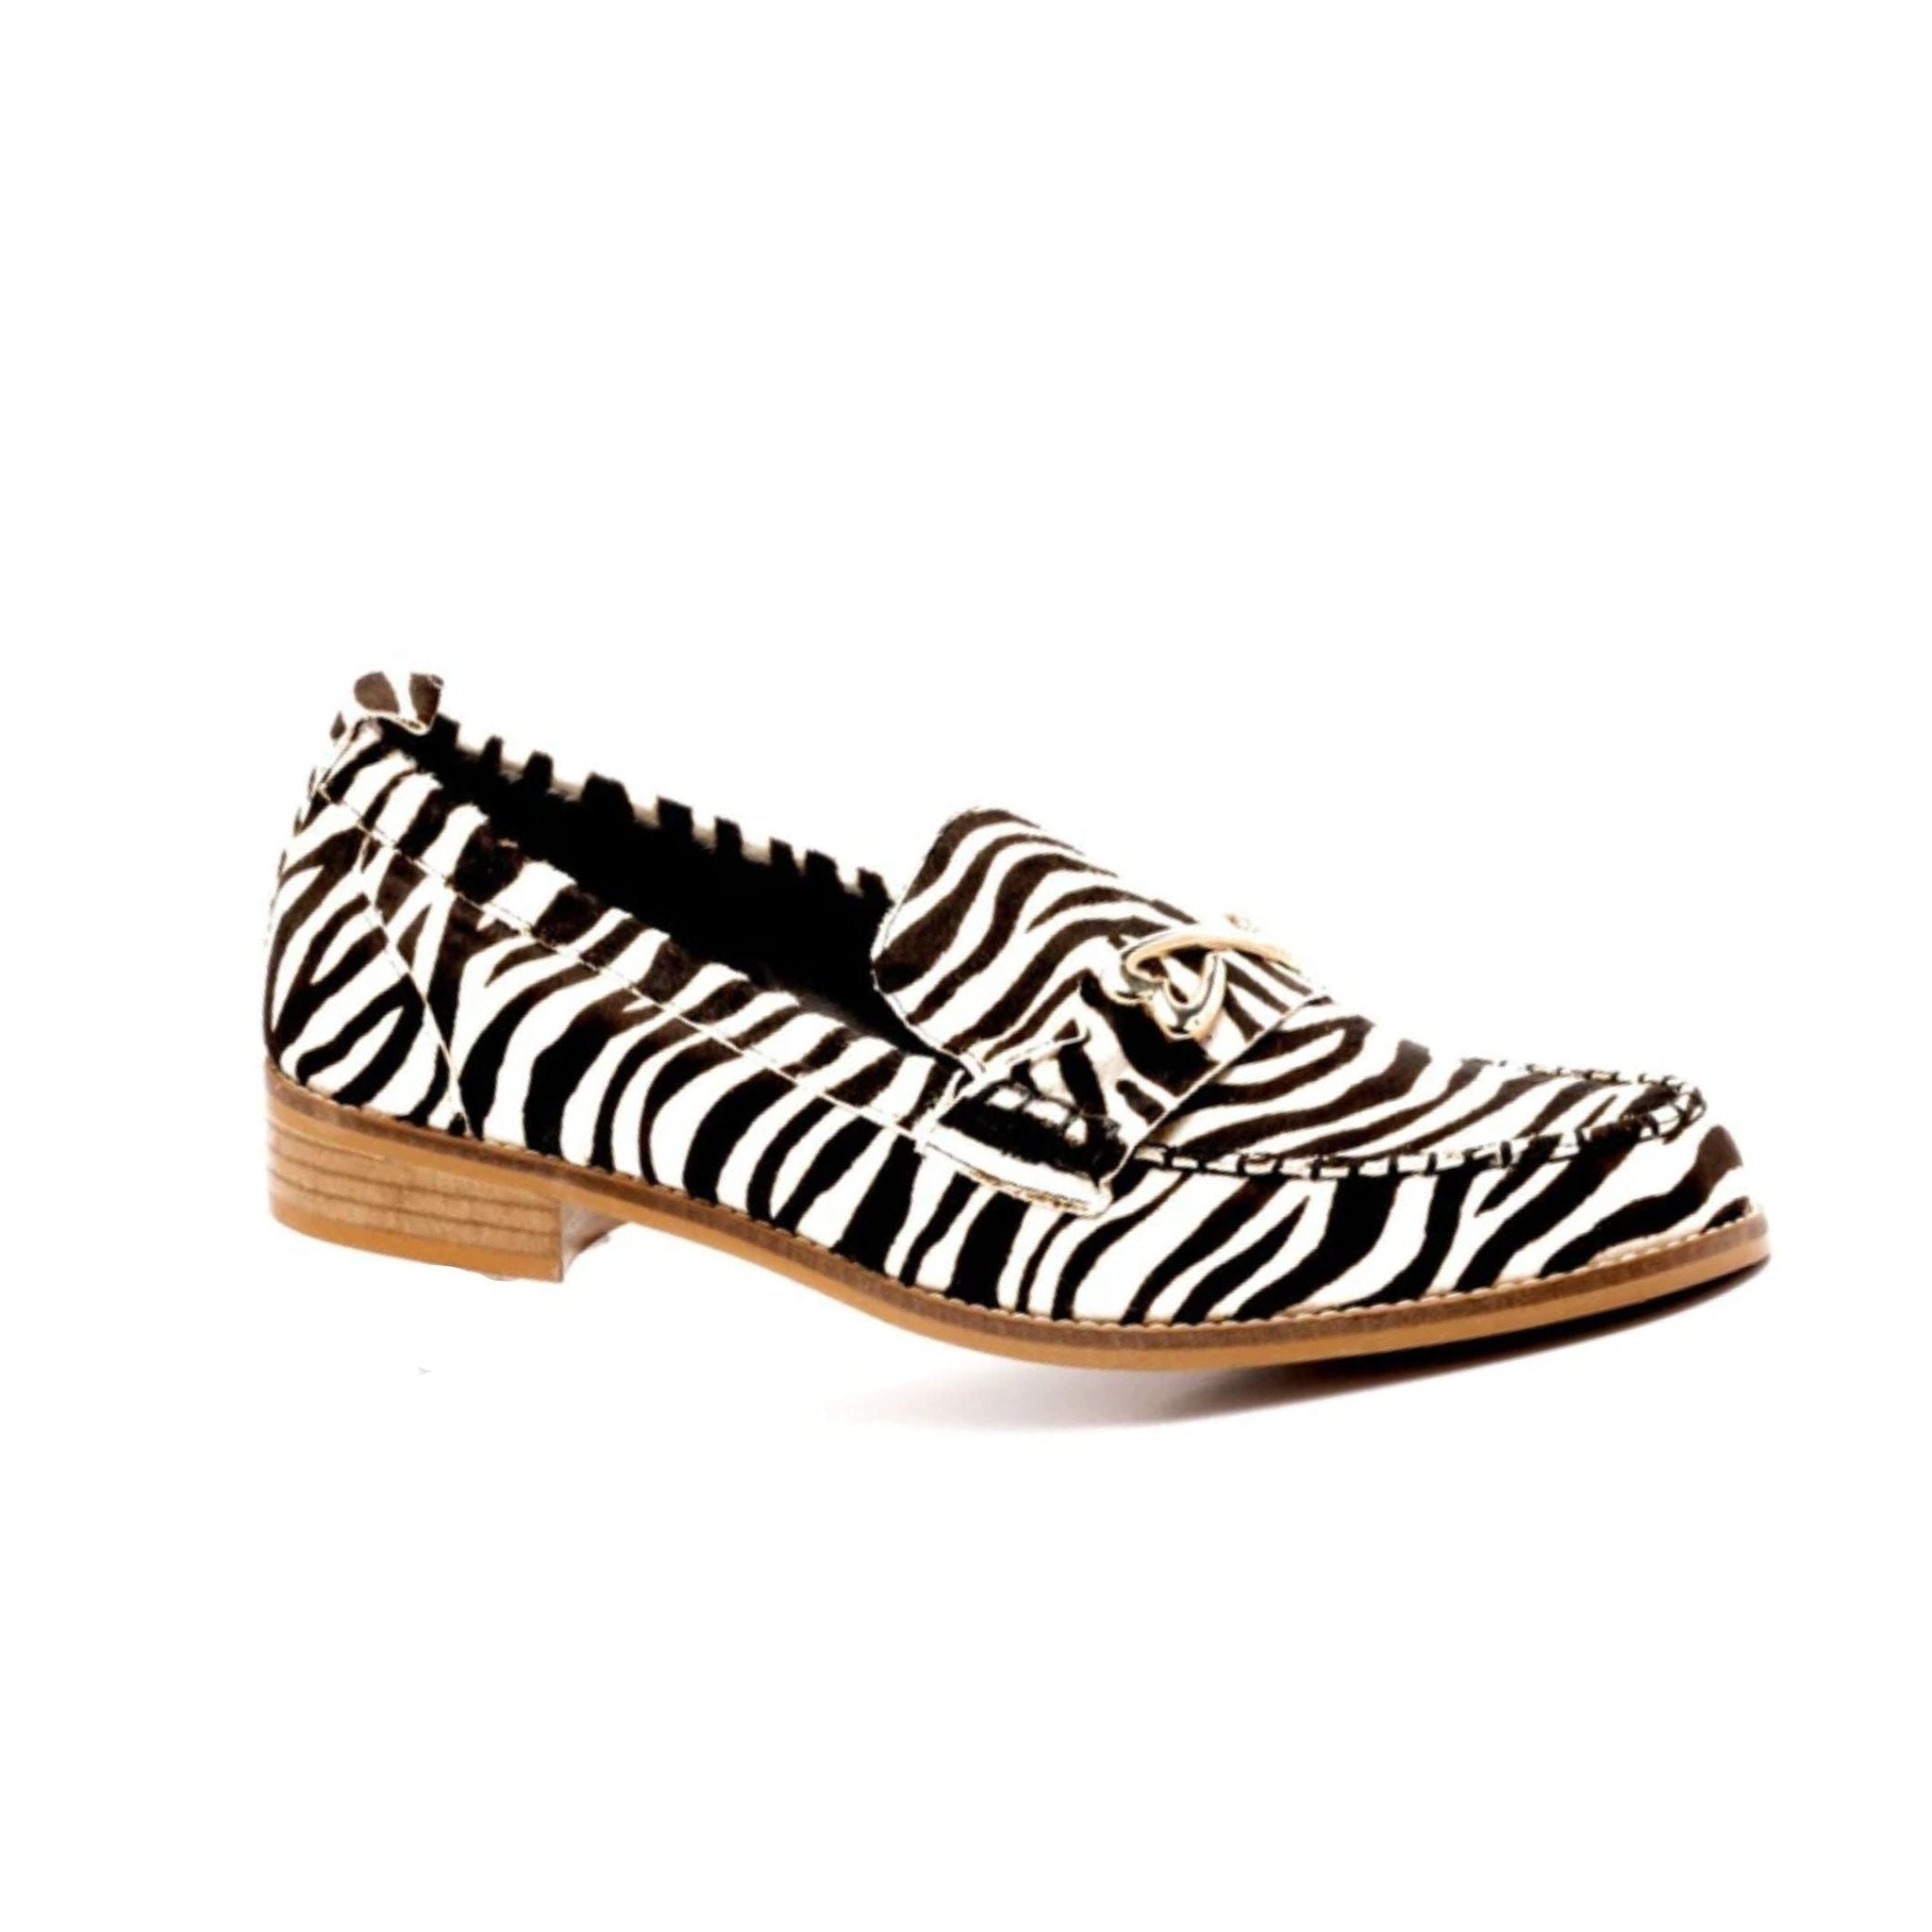 zebra print calf leather loafer large sizes